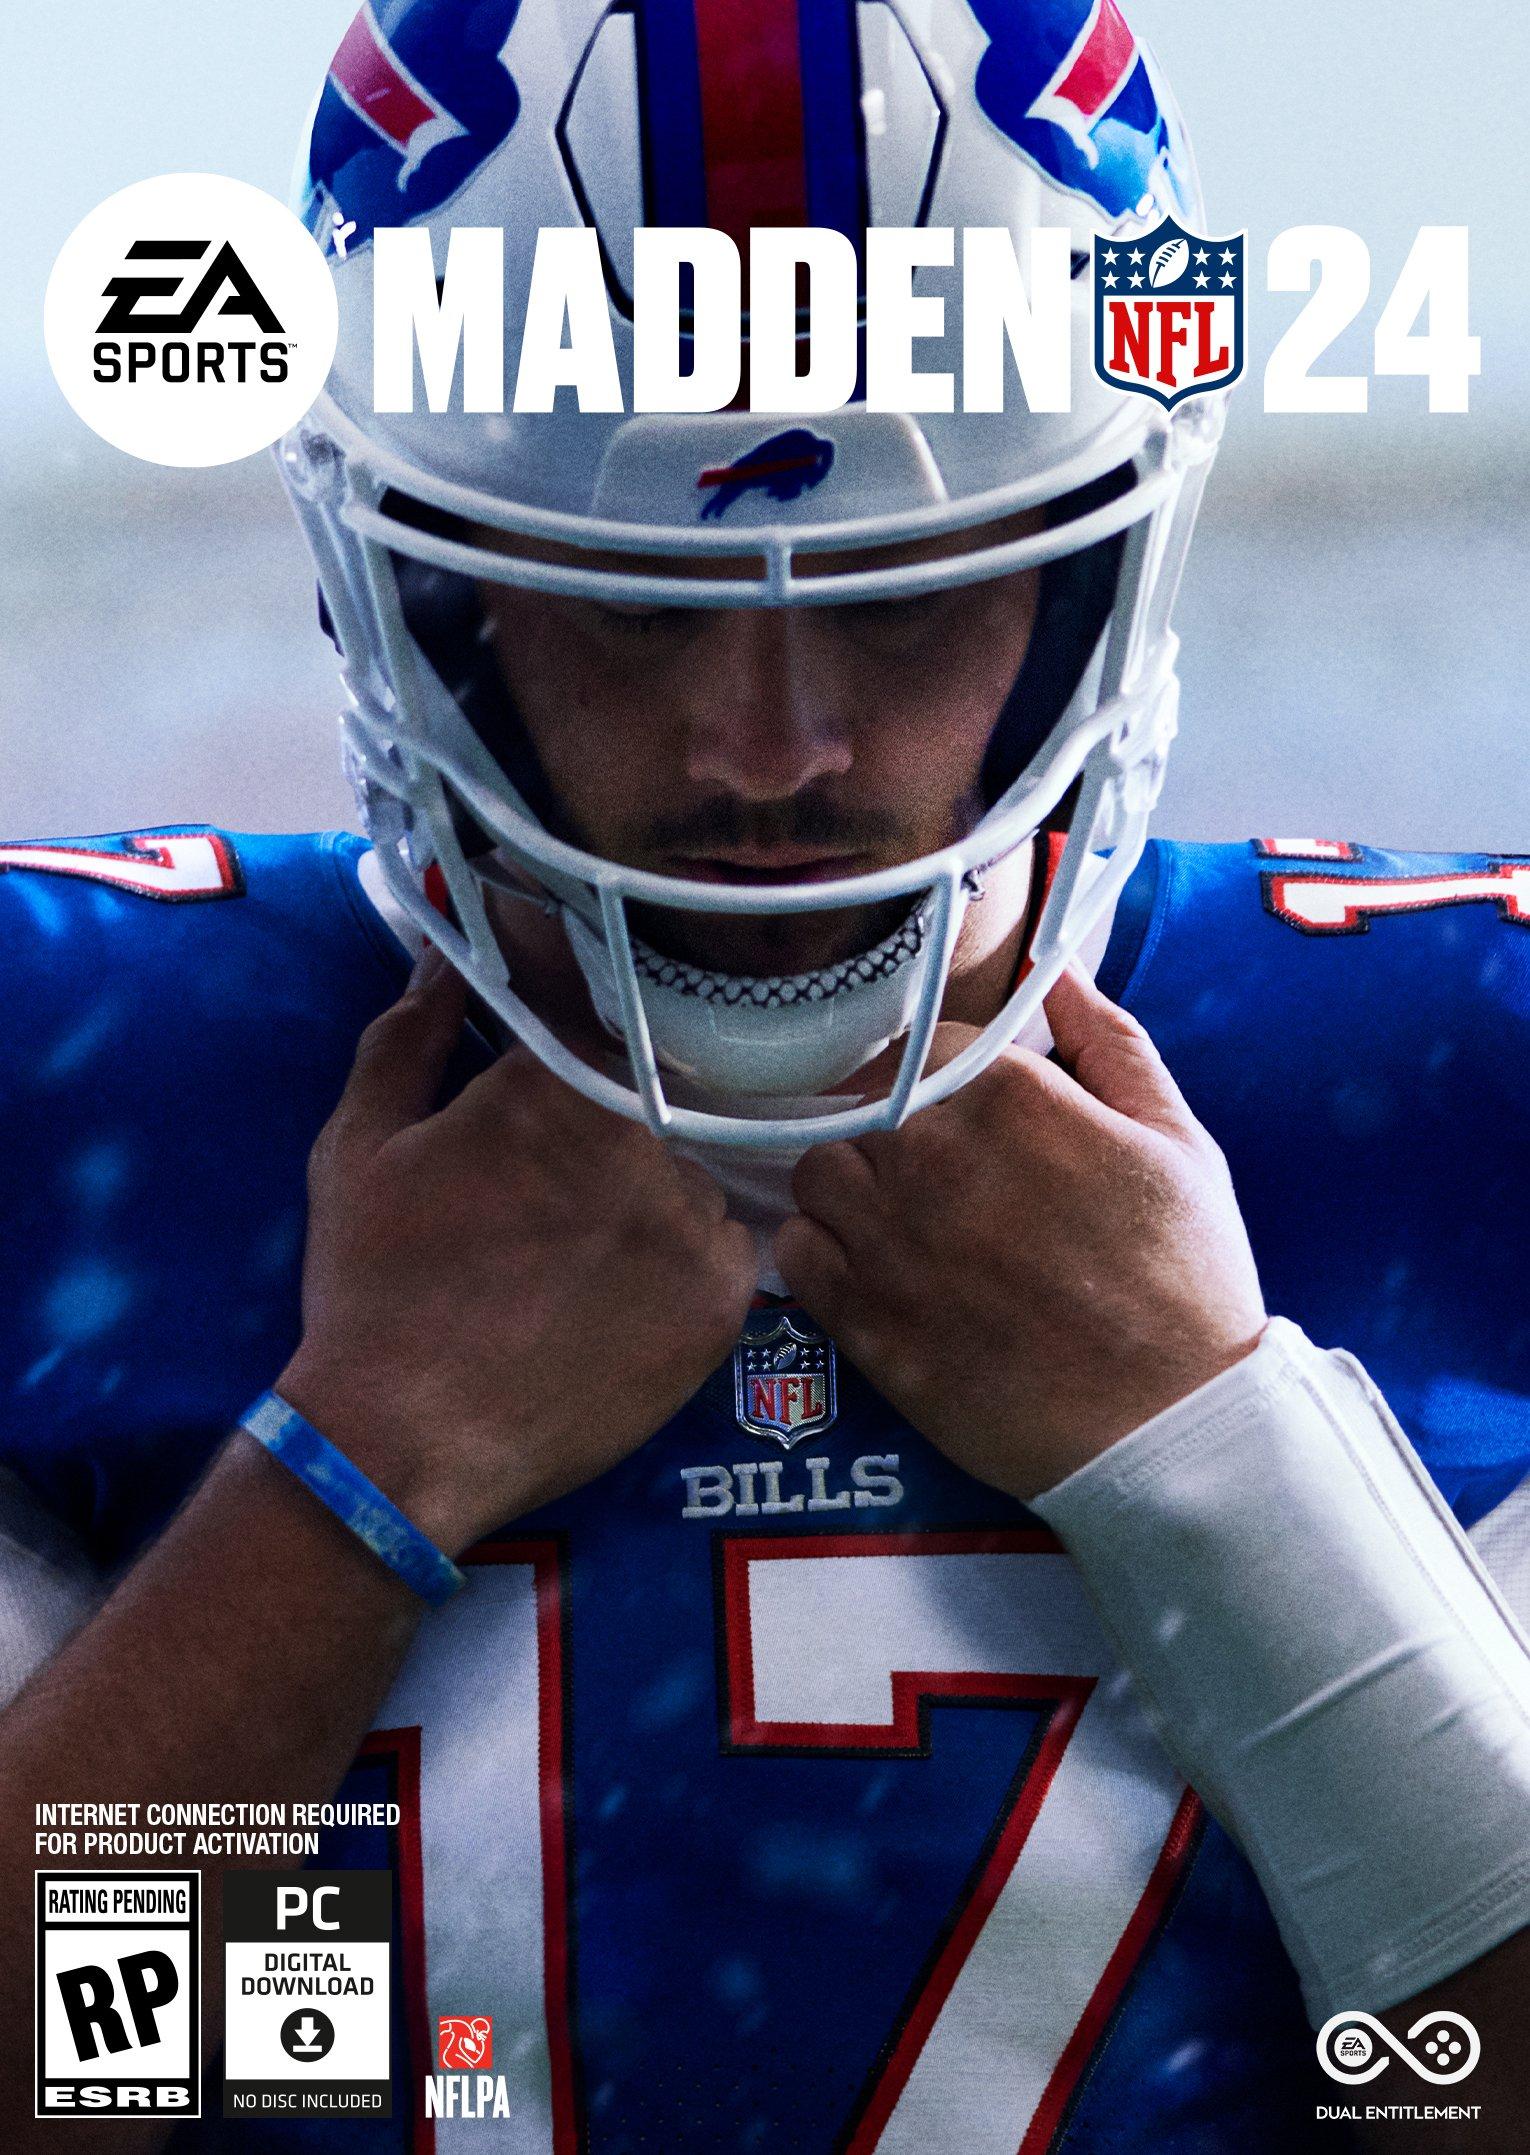 Madden NFL 24  Download and Buy Today - Epic Games Store